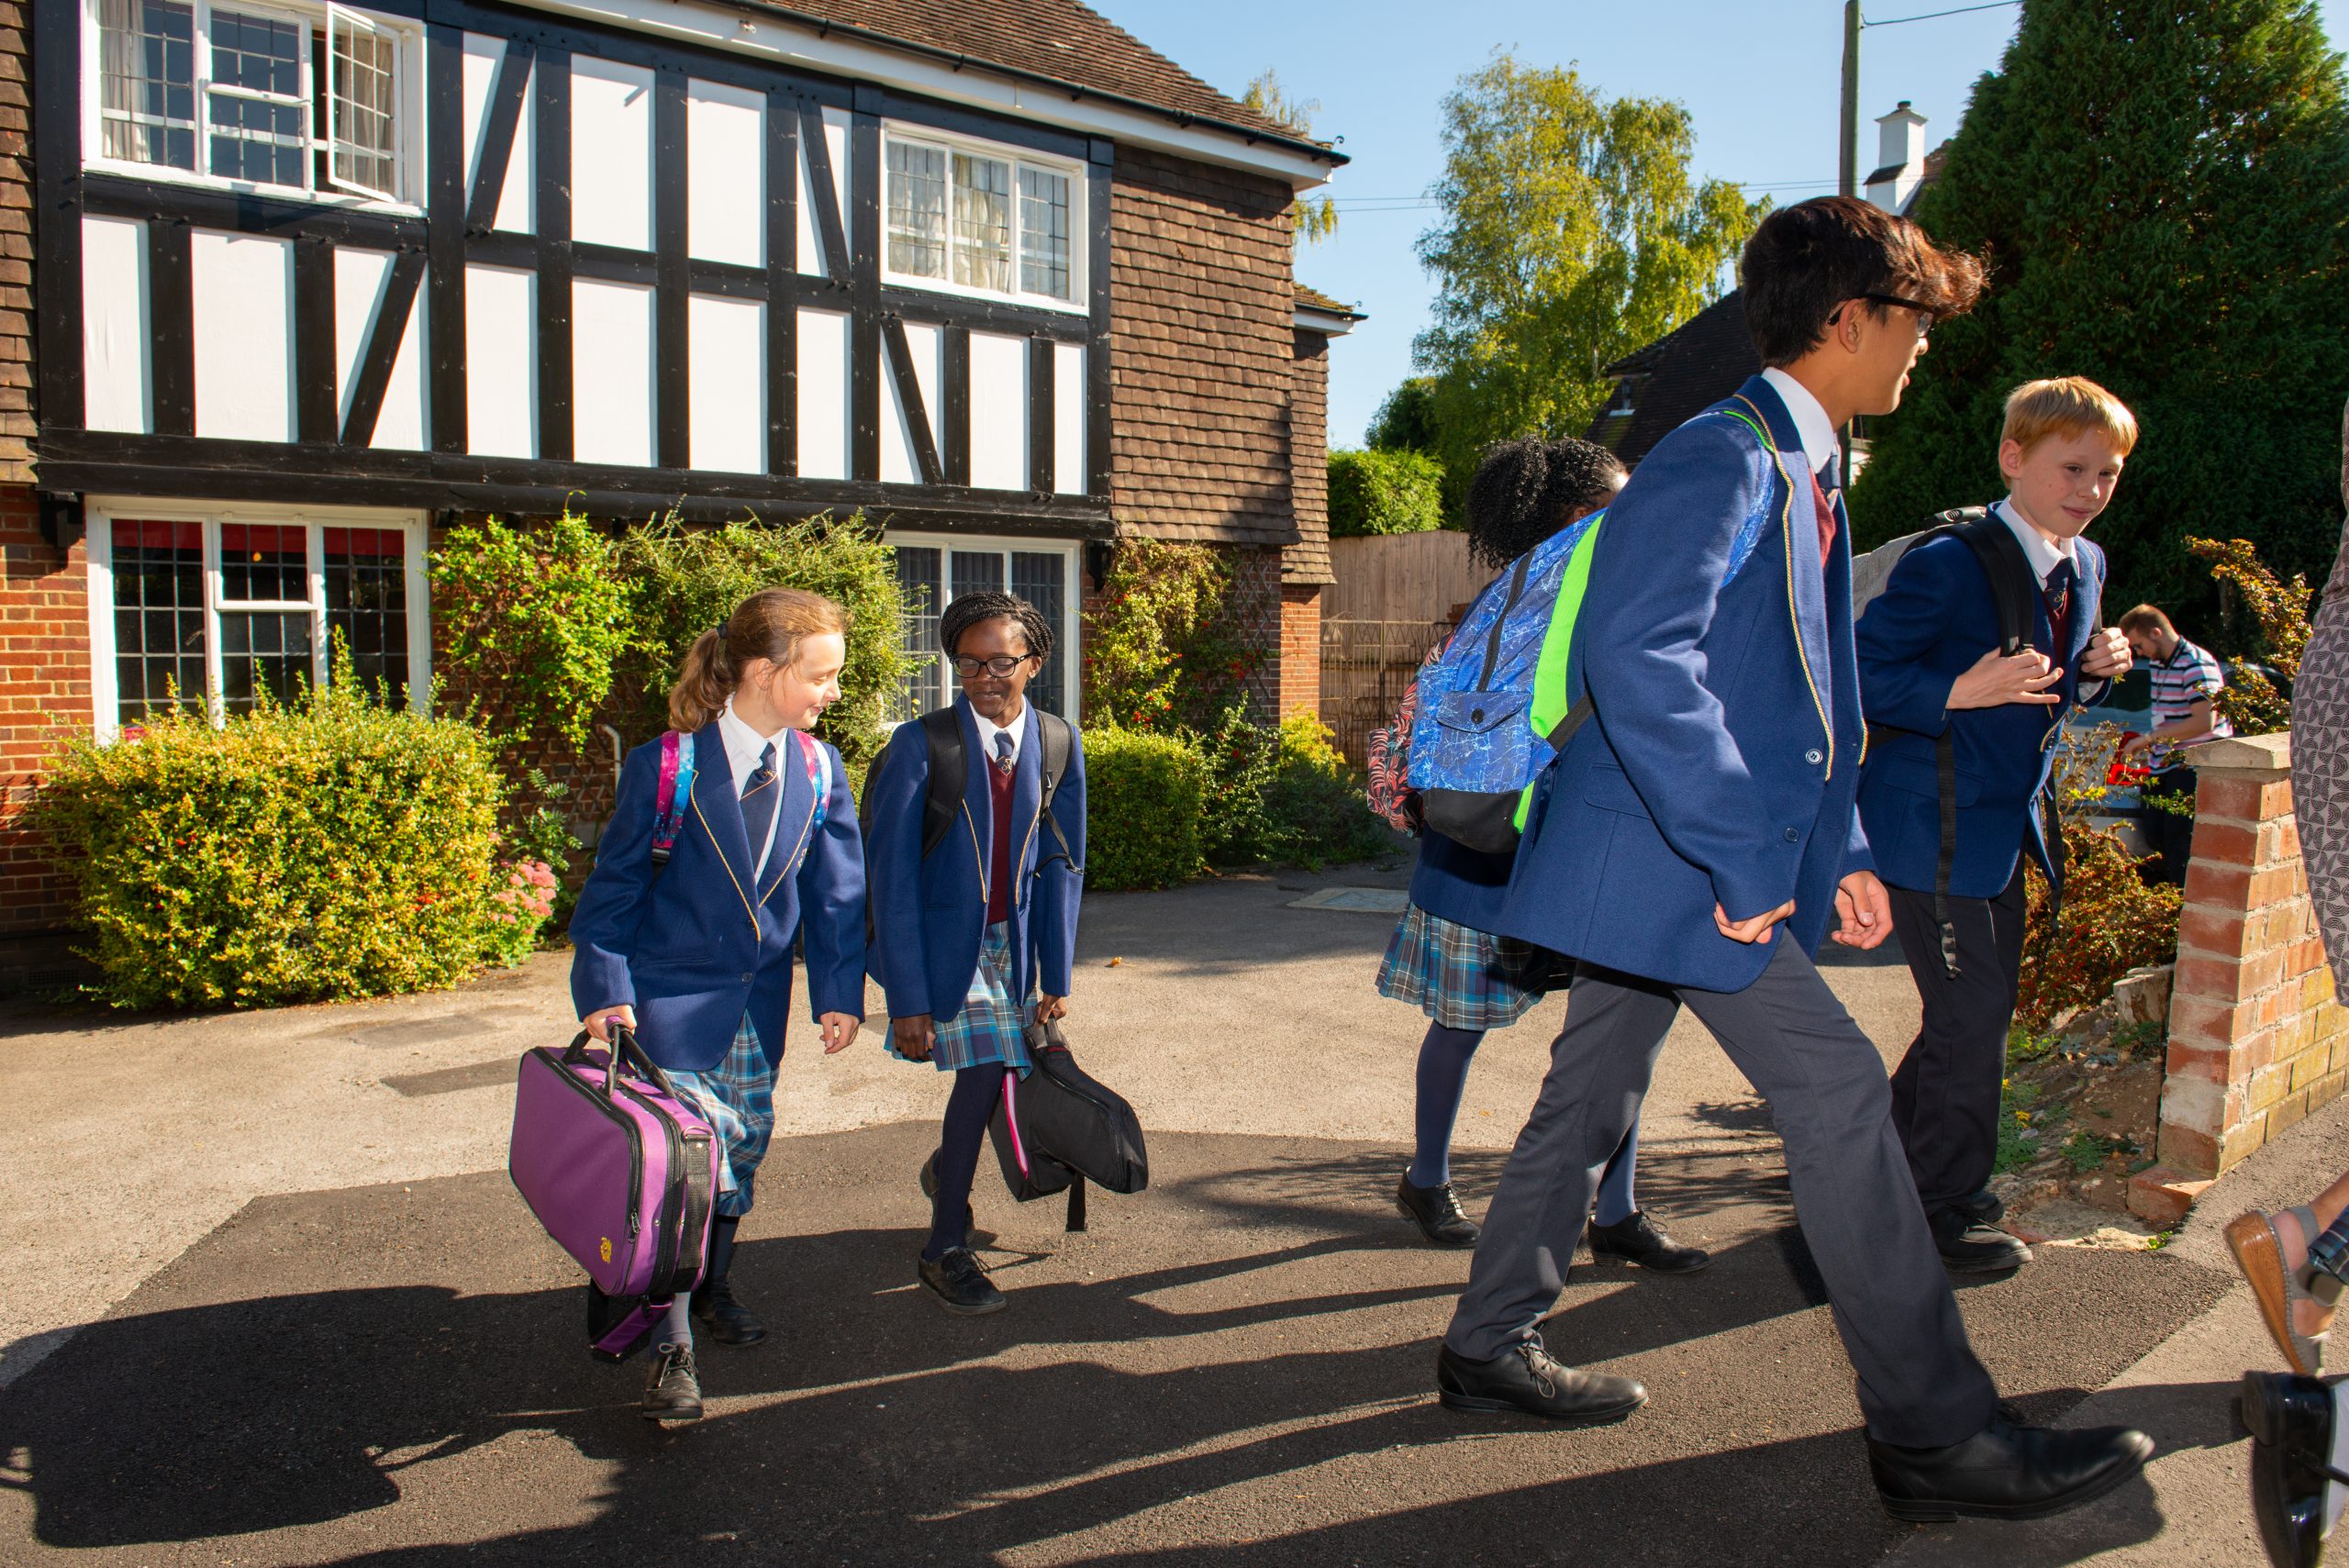 Rookwood boarding school students walking to the school together.